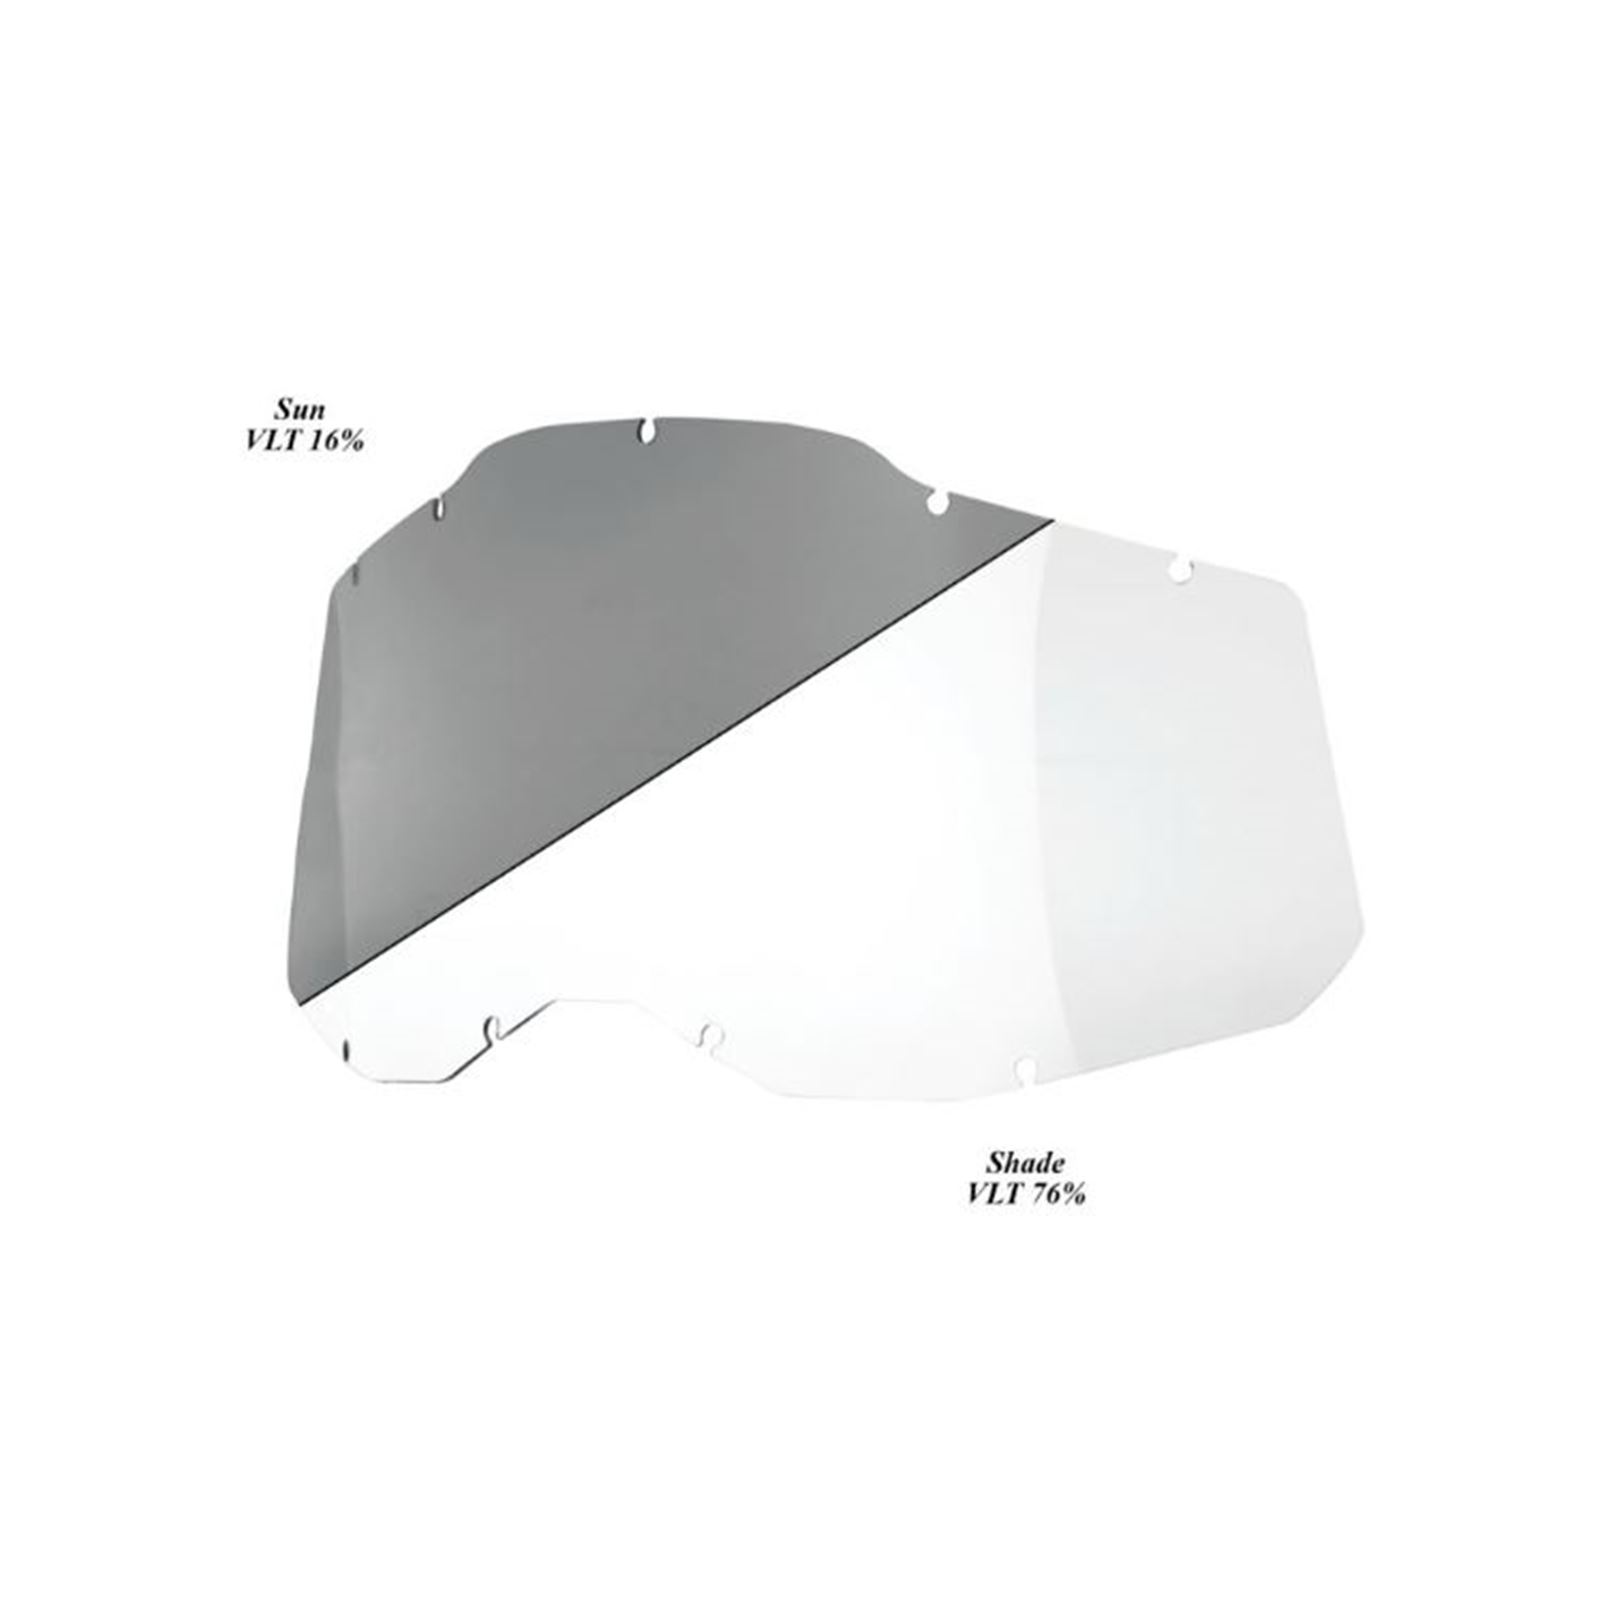 100% 2.0 Replacement Lens, Photochromic